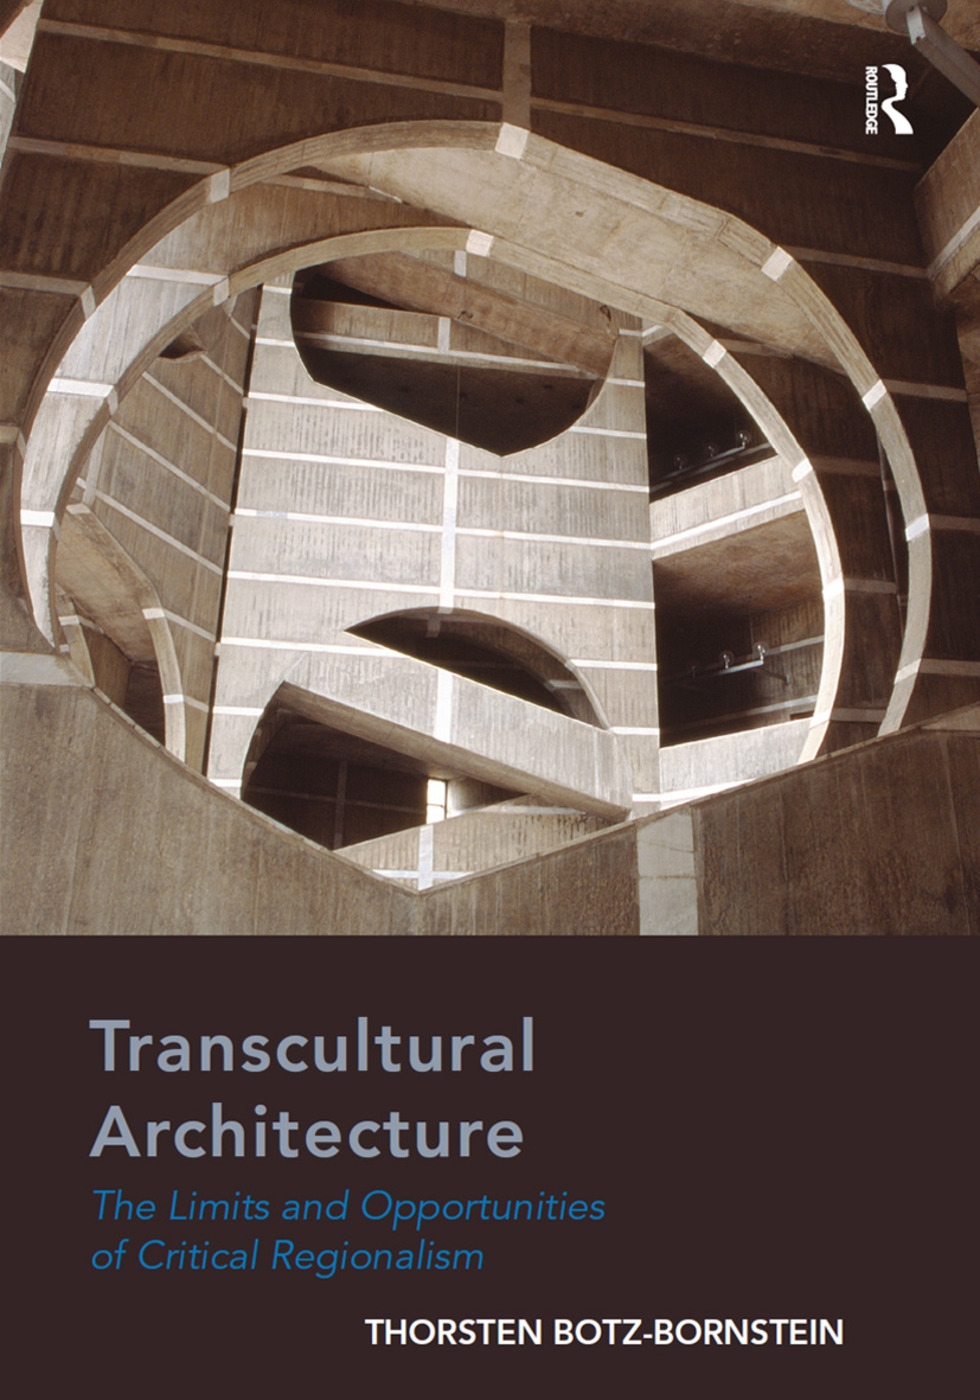 Transcultural Architecture: The Limits and Opportunities of Critical Regionalism